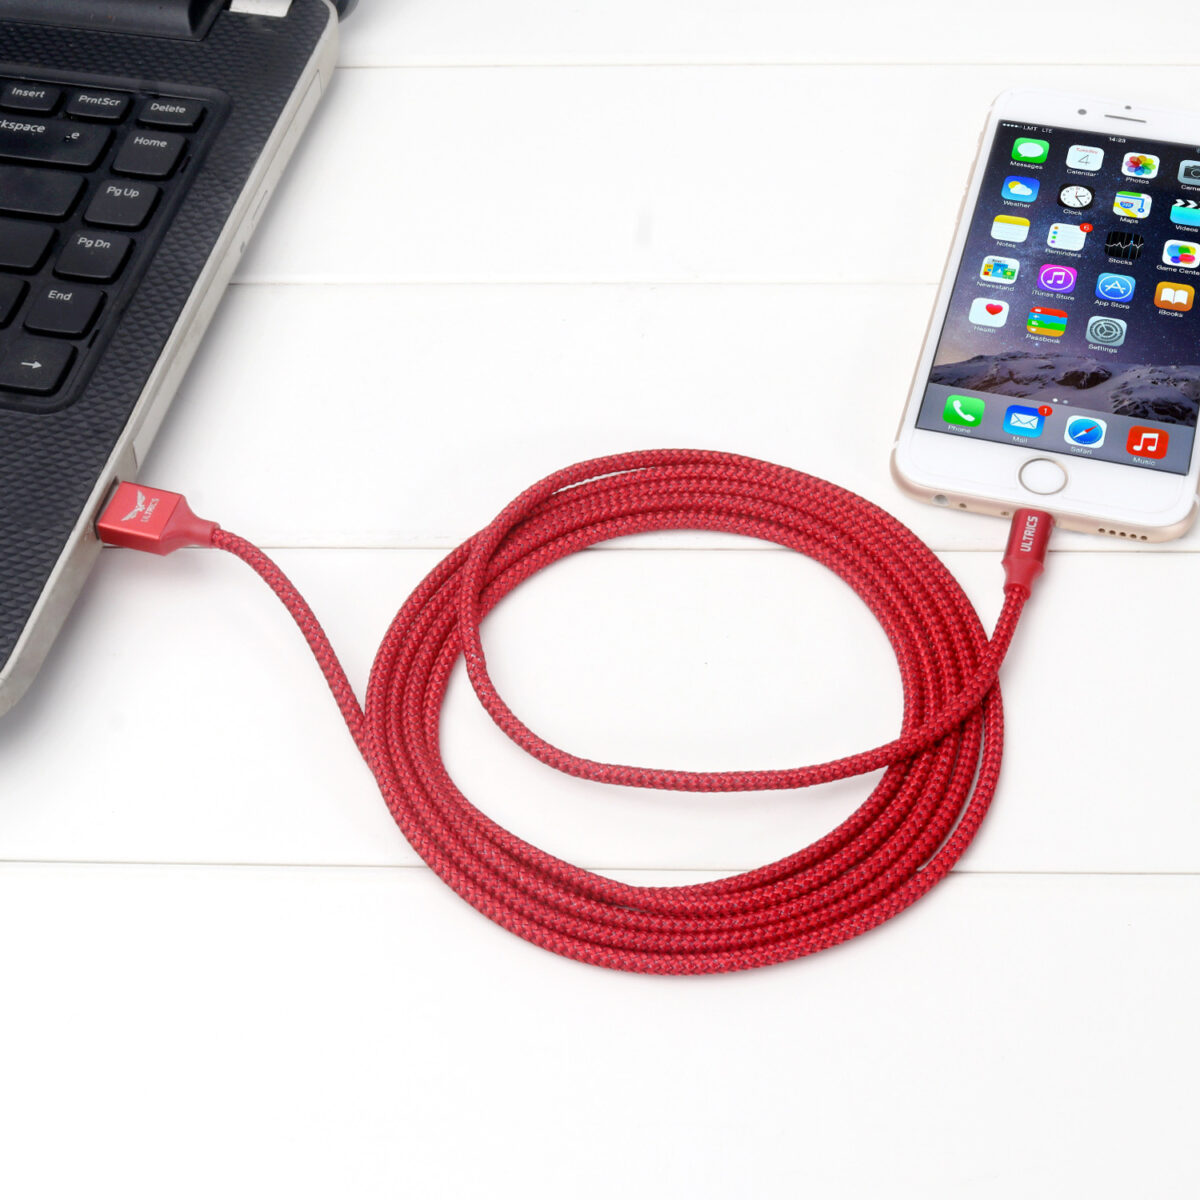 Lightning Cable, iPhone Charger, MFi certified Cable